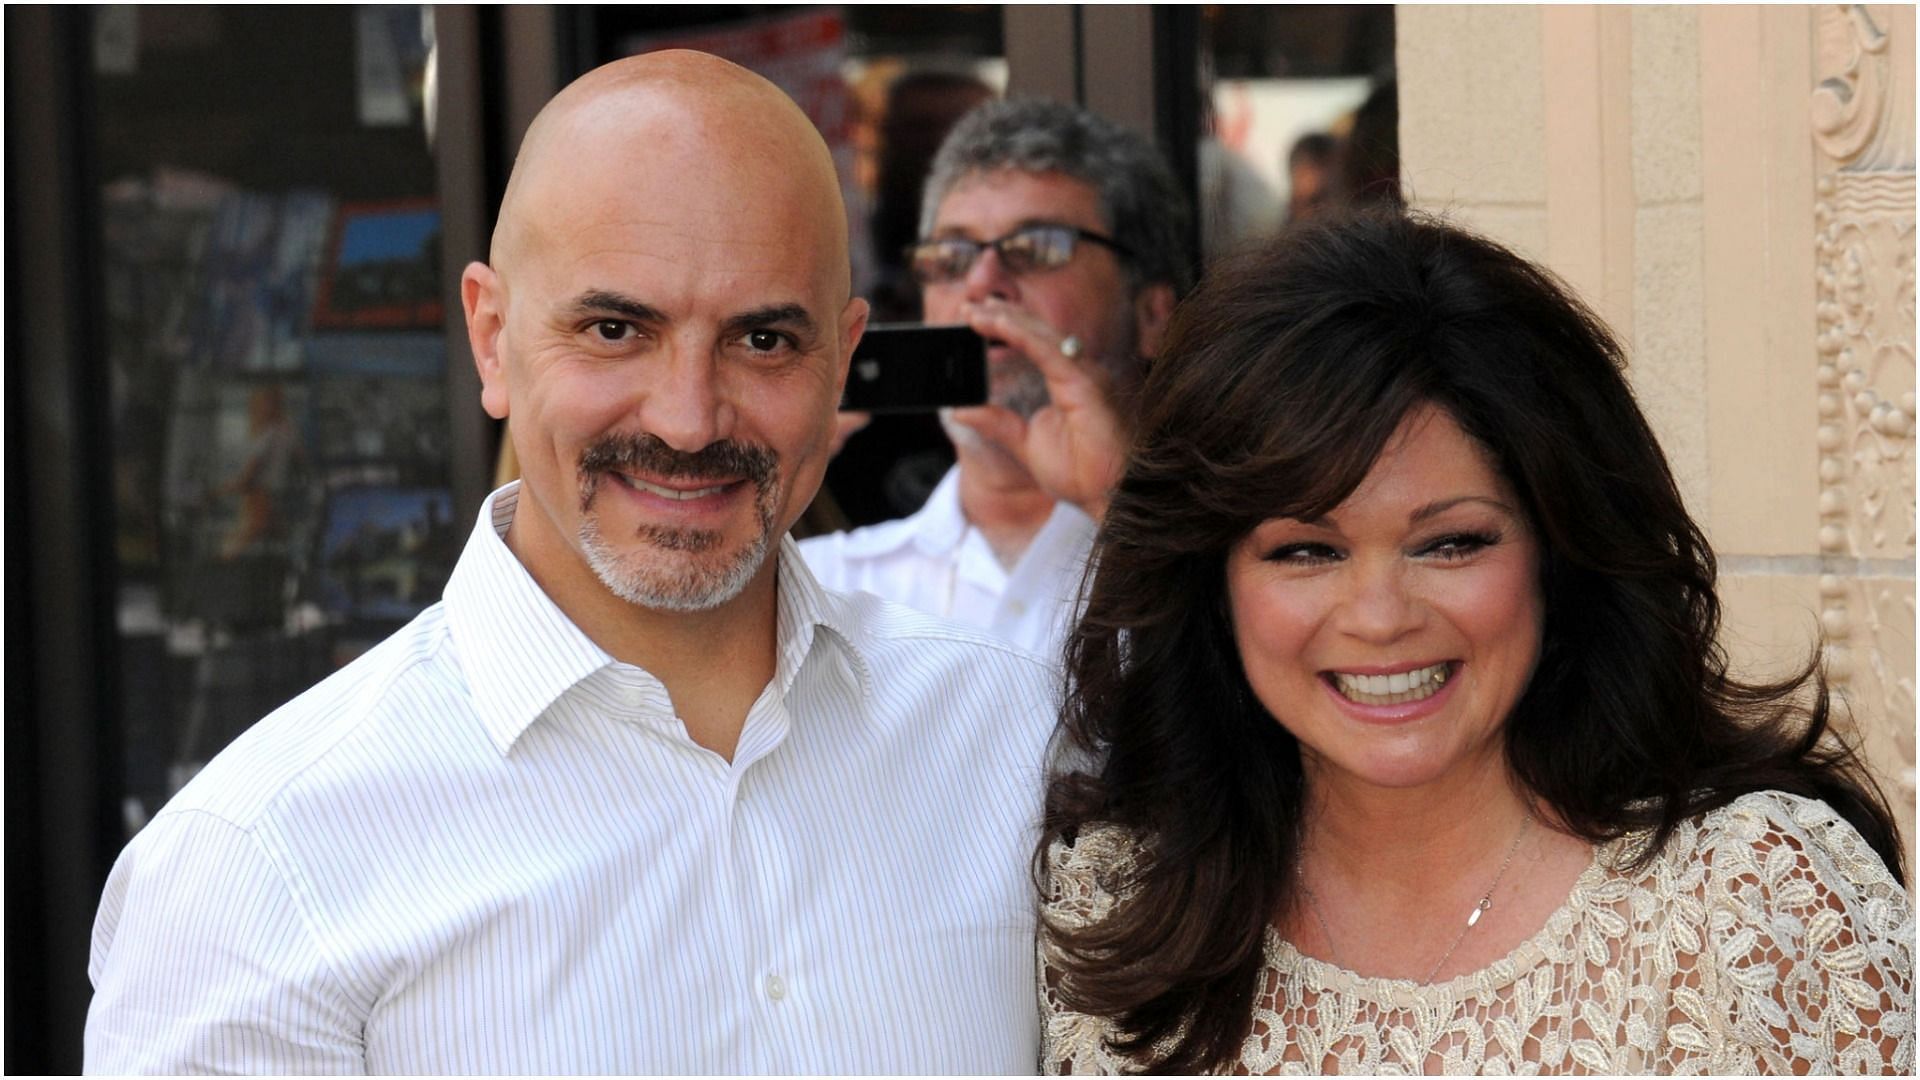 Tom Vitale and Valerie Bertinelli participate in the Hollywood Walk Of Fame Star ceremony (Image by Albert L. Ortega via Getty Images)